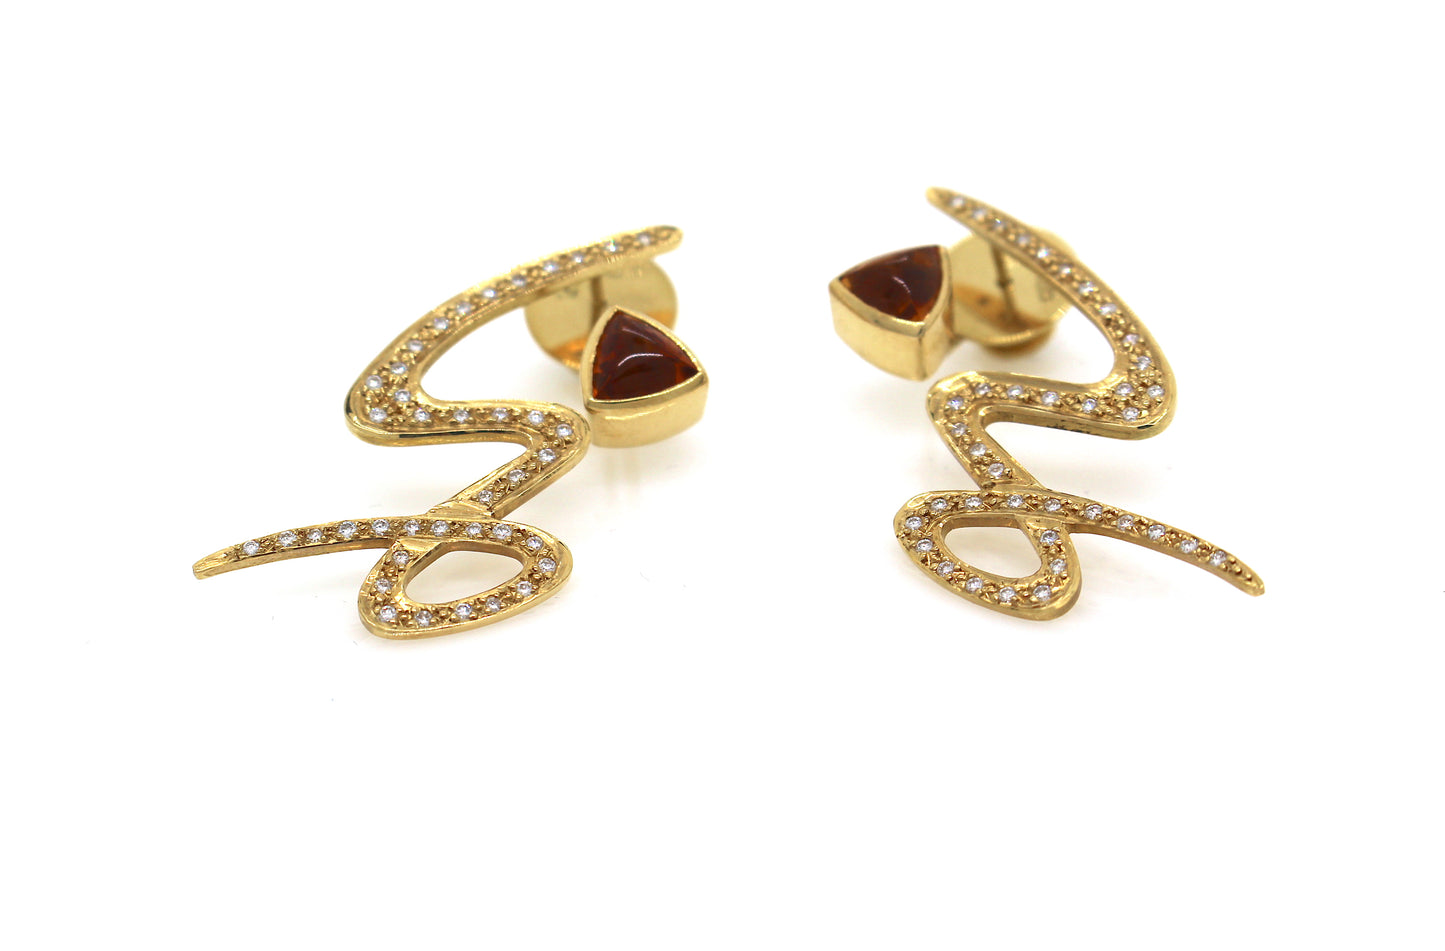 18ct gold earrings by Constantinos Kyriacou. With Citrine and diamonds. 2001.